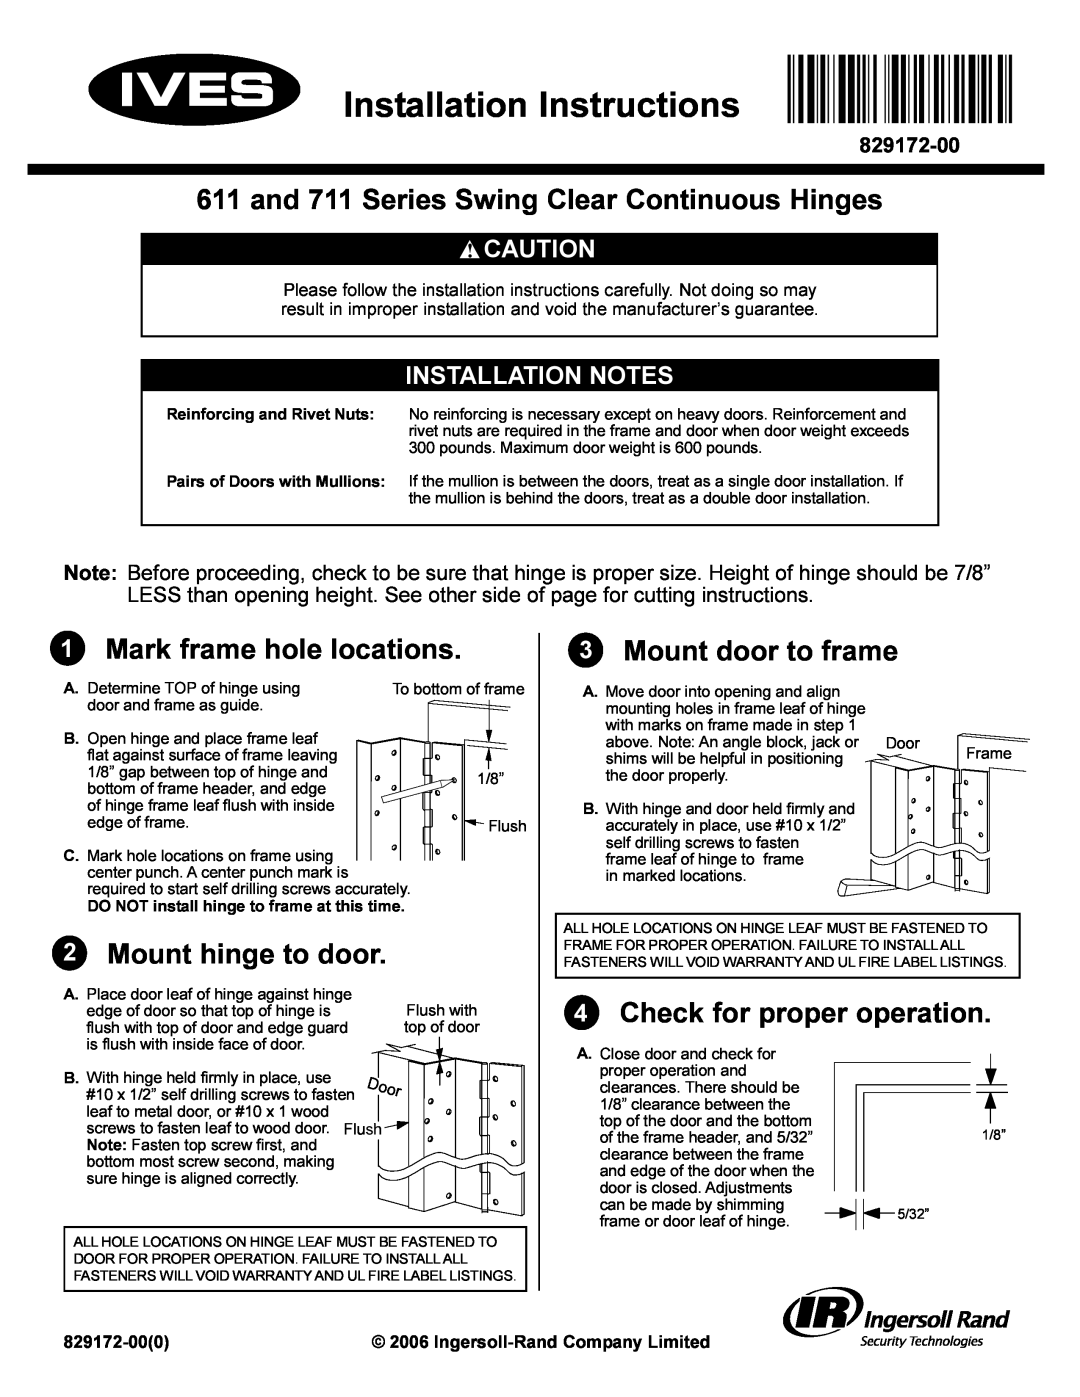 Ives installation instructions and 711 Series Swing Clear Continuous Hinges, Mark frame hole locations, 829172-000 